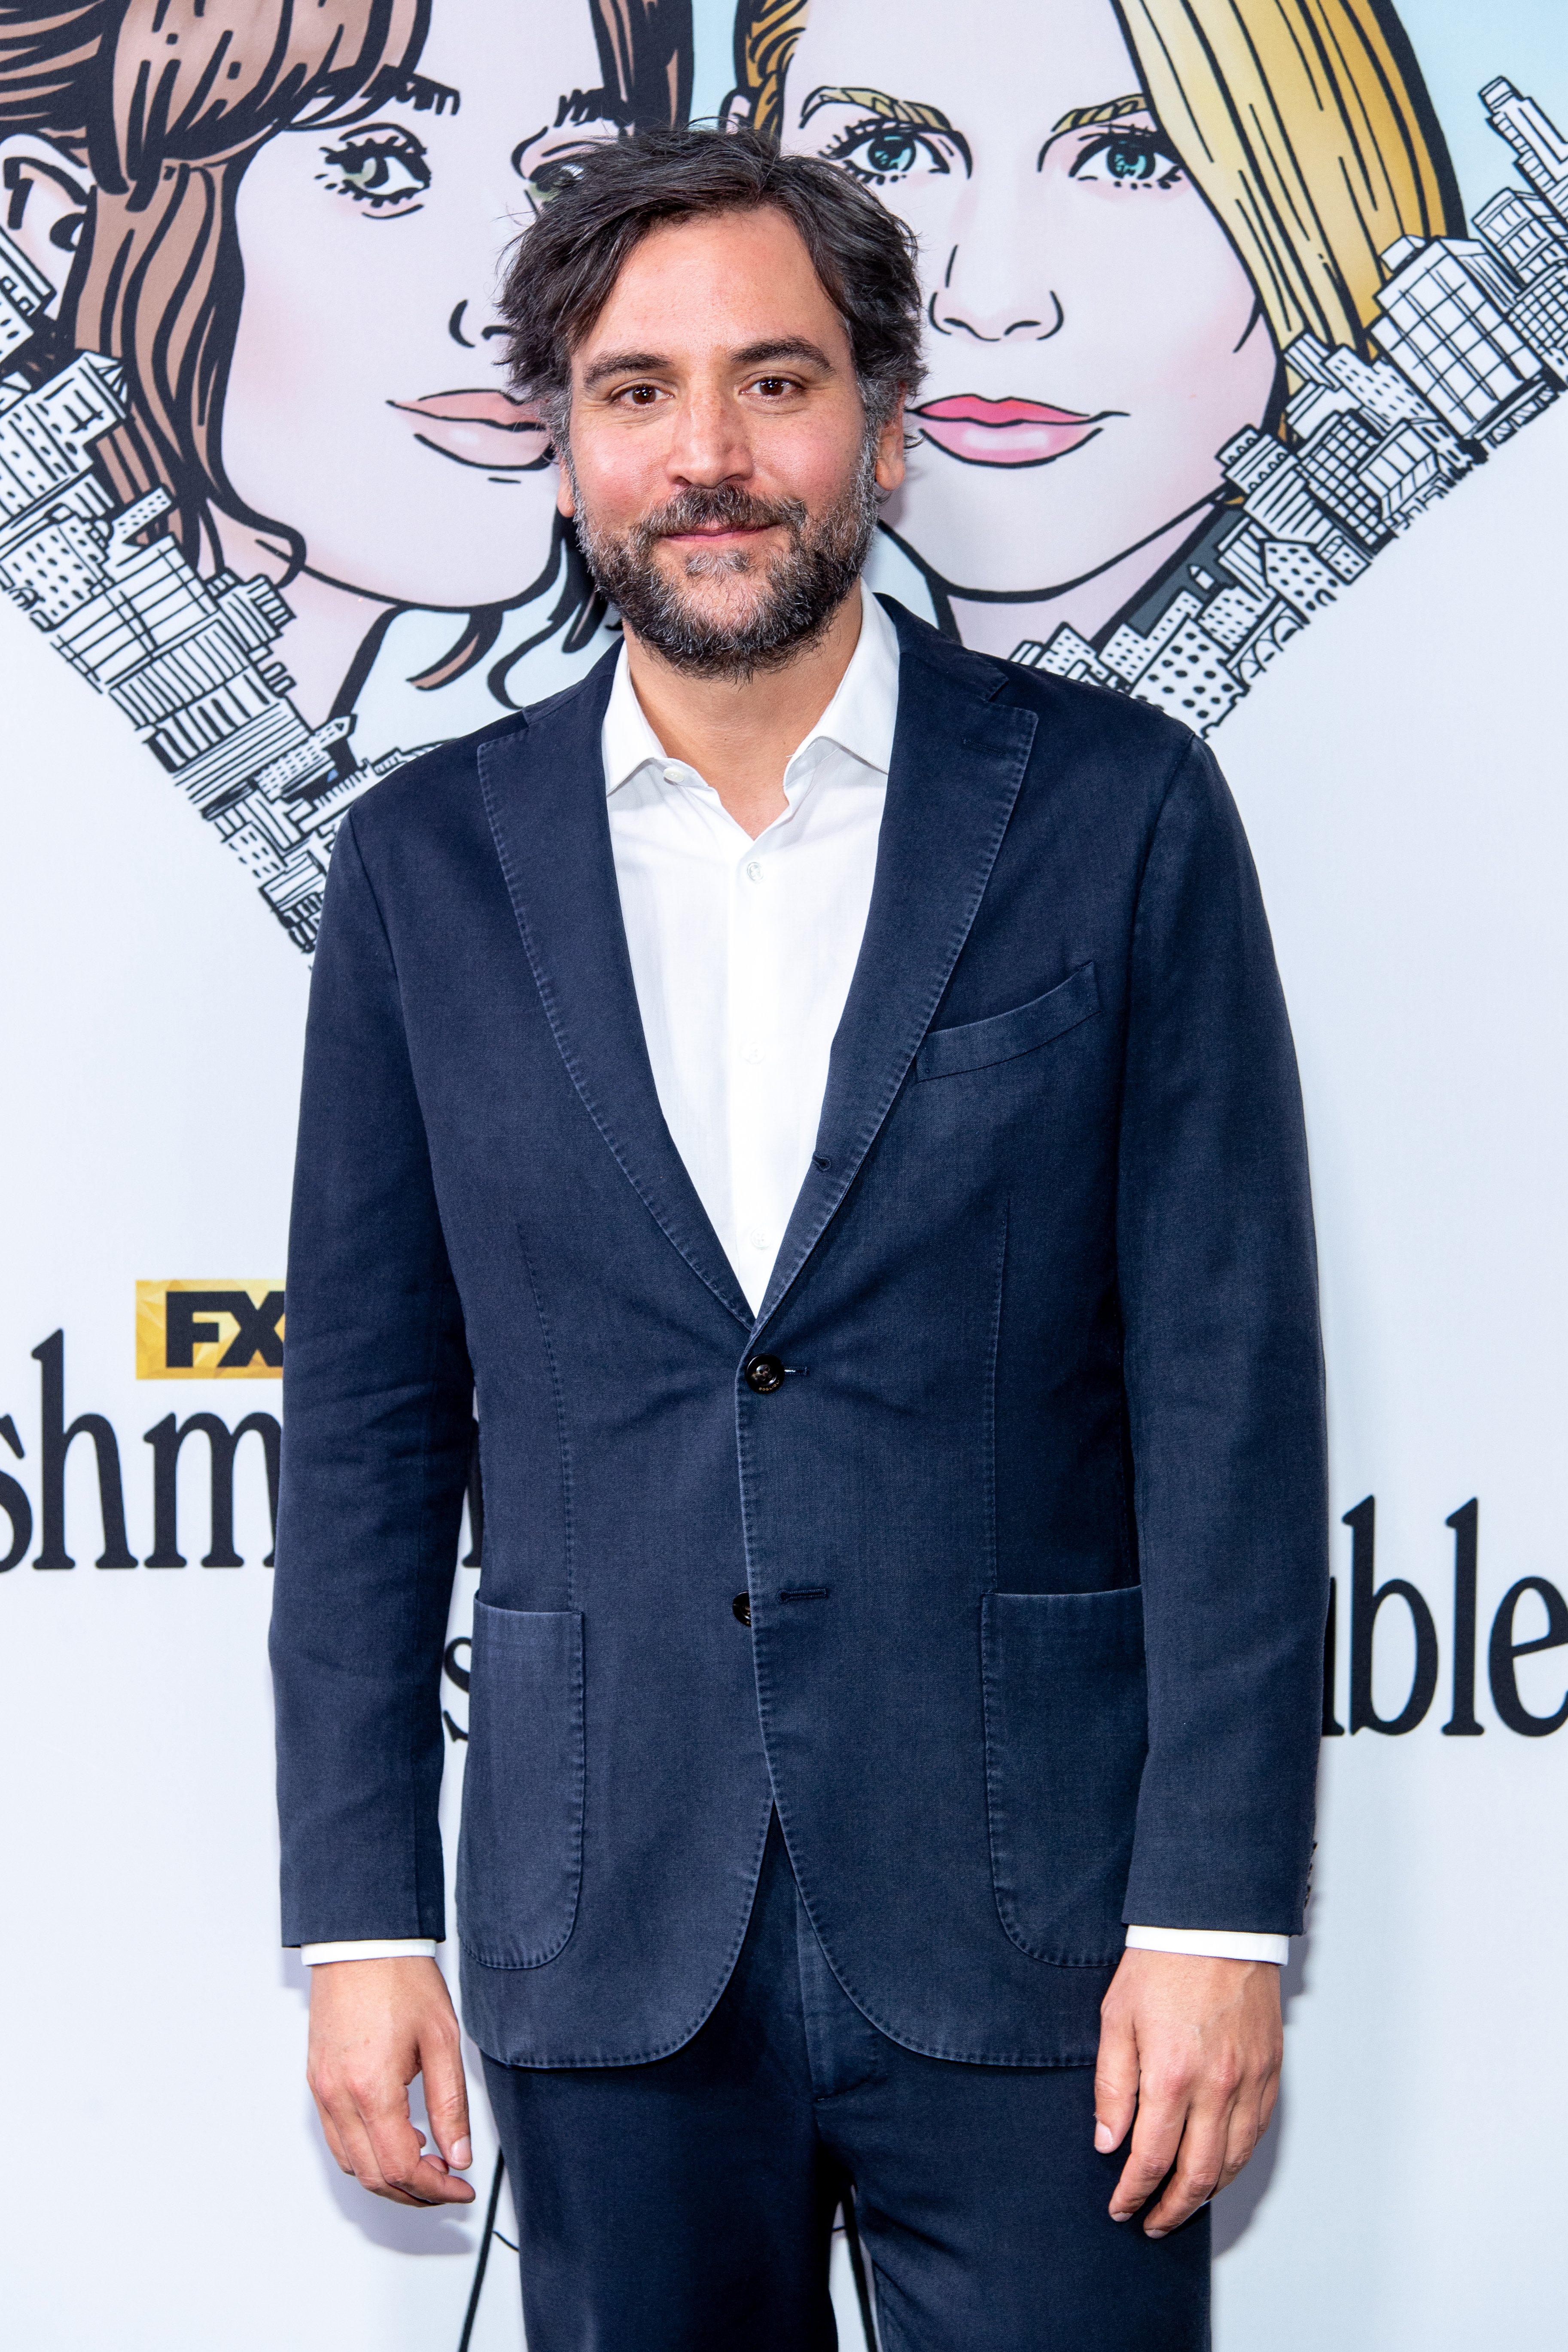 Josh Radnor at the premiere "Fleishman Is In Trouble" on November 07, 2022, in New York City. | Source: Getty Images